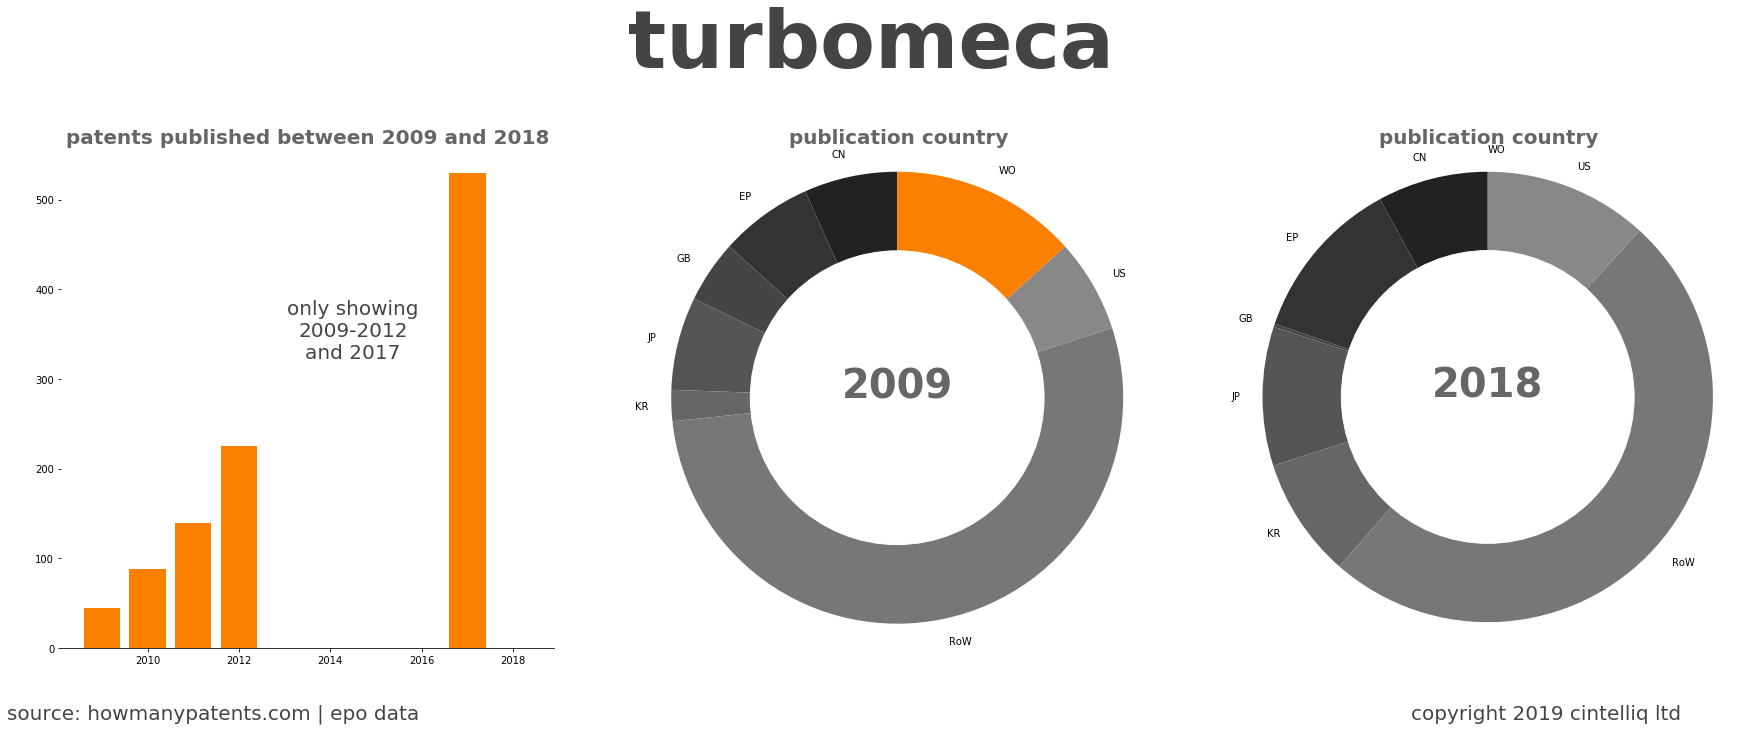 summary of patents for Turbomeca